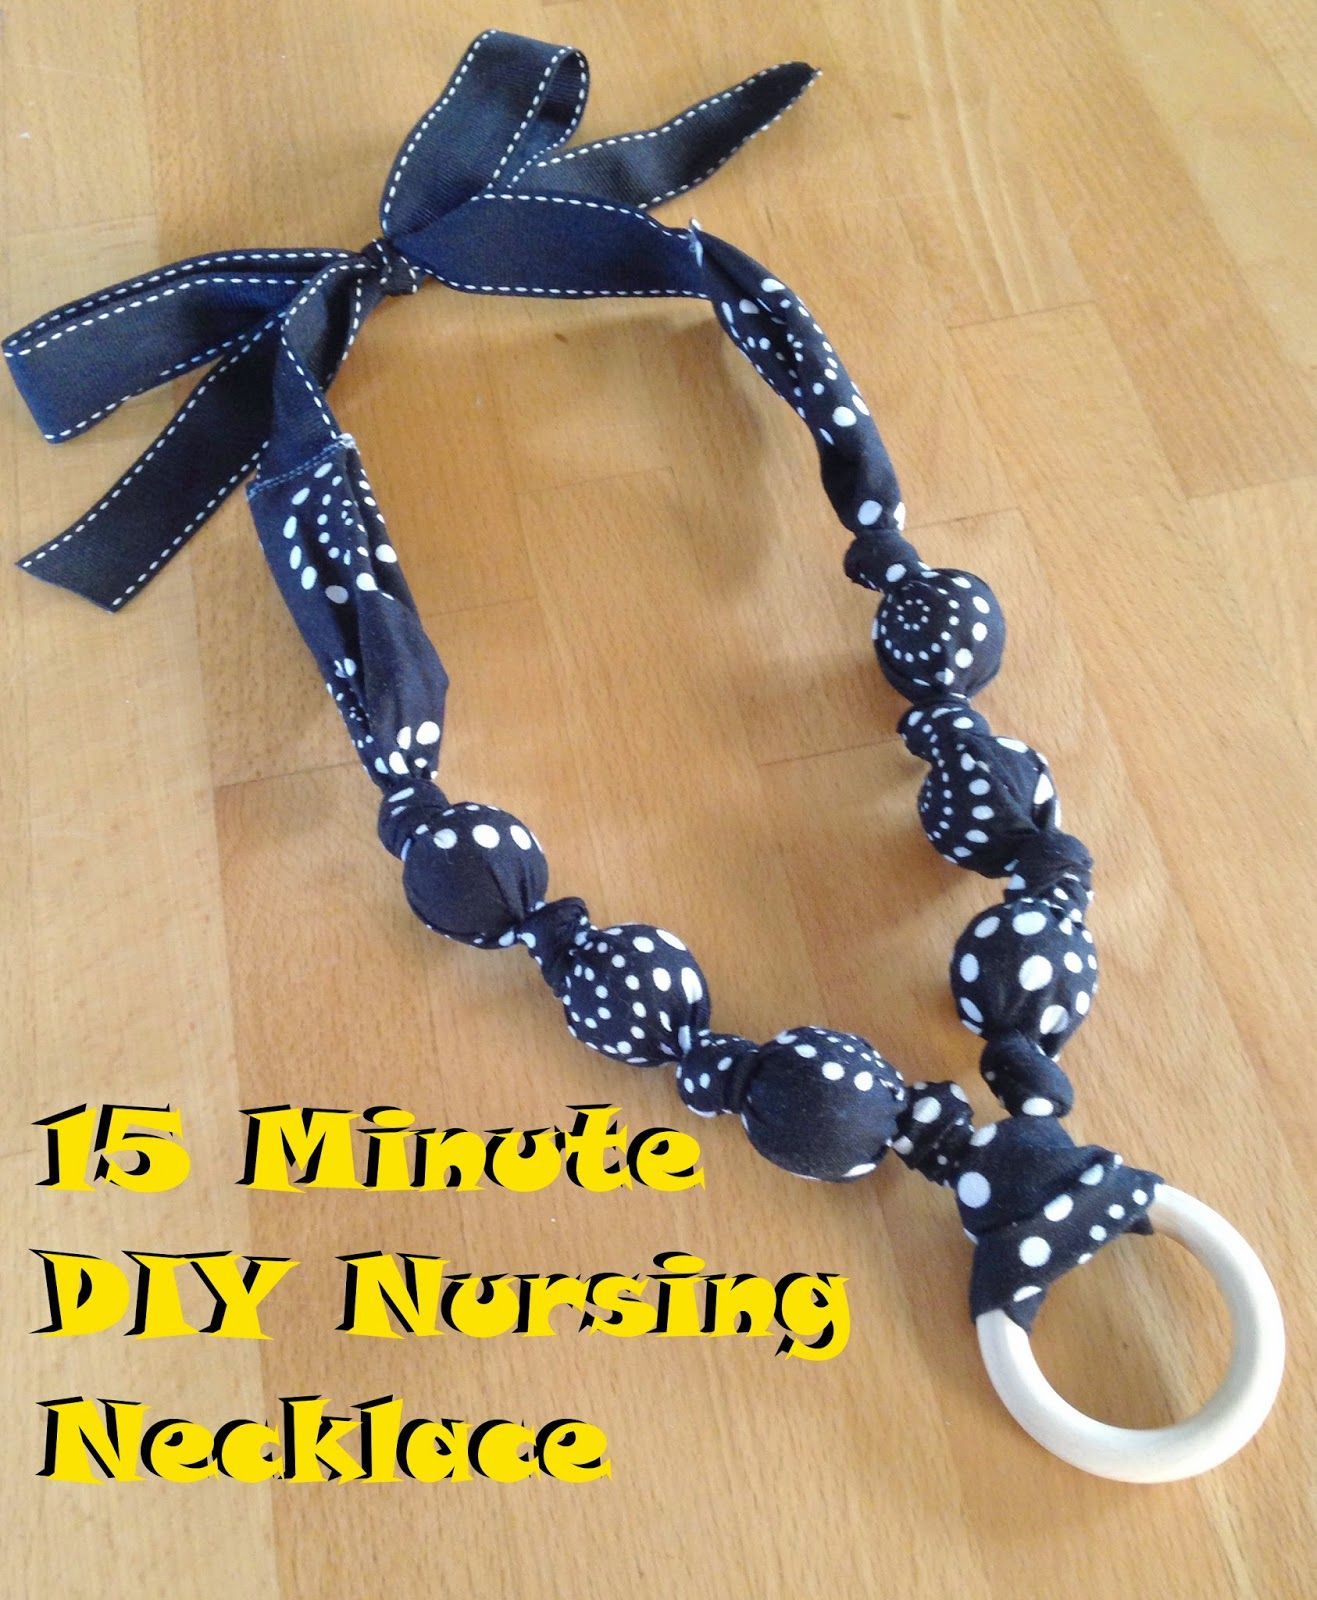 Traxel Time: 15 Minute DIY Nursing Necklace – a comfortable necklace for breastfeeding babies to hold or pull on while they eat.